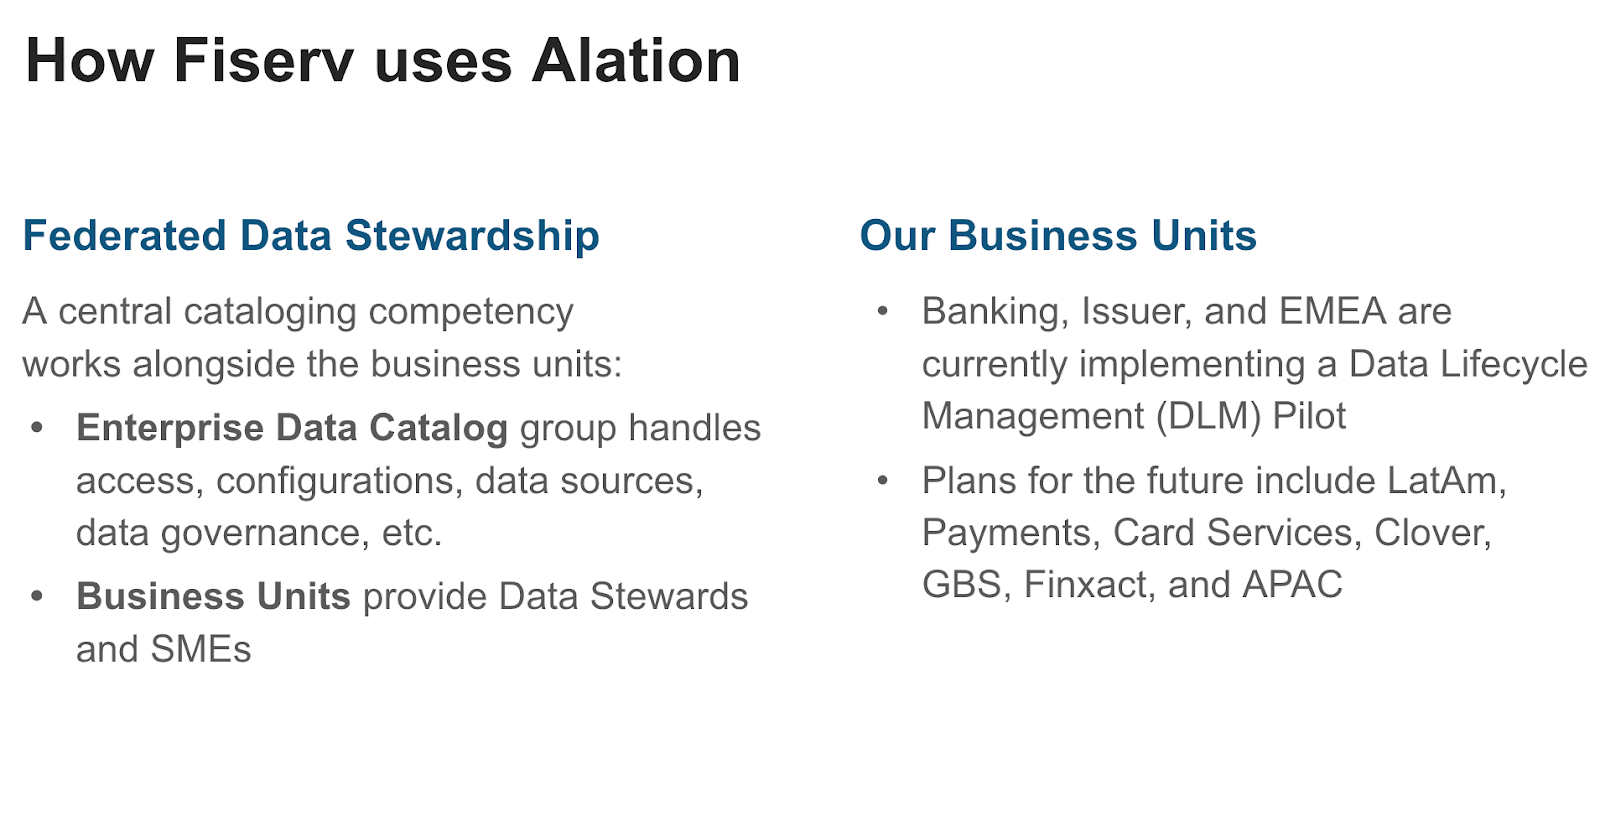 Slide from Fiserv presentation showing how they federate data stewardship with Alation